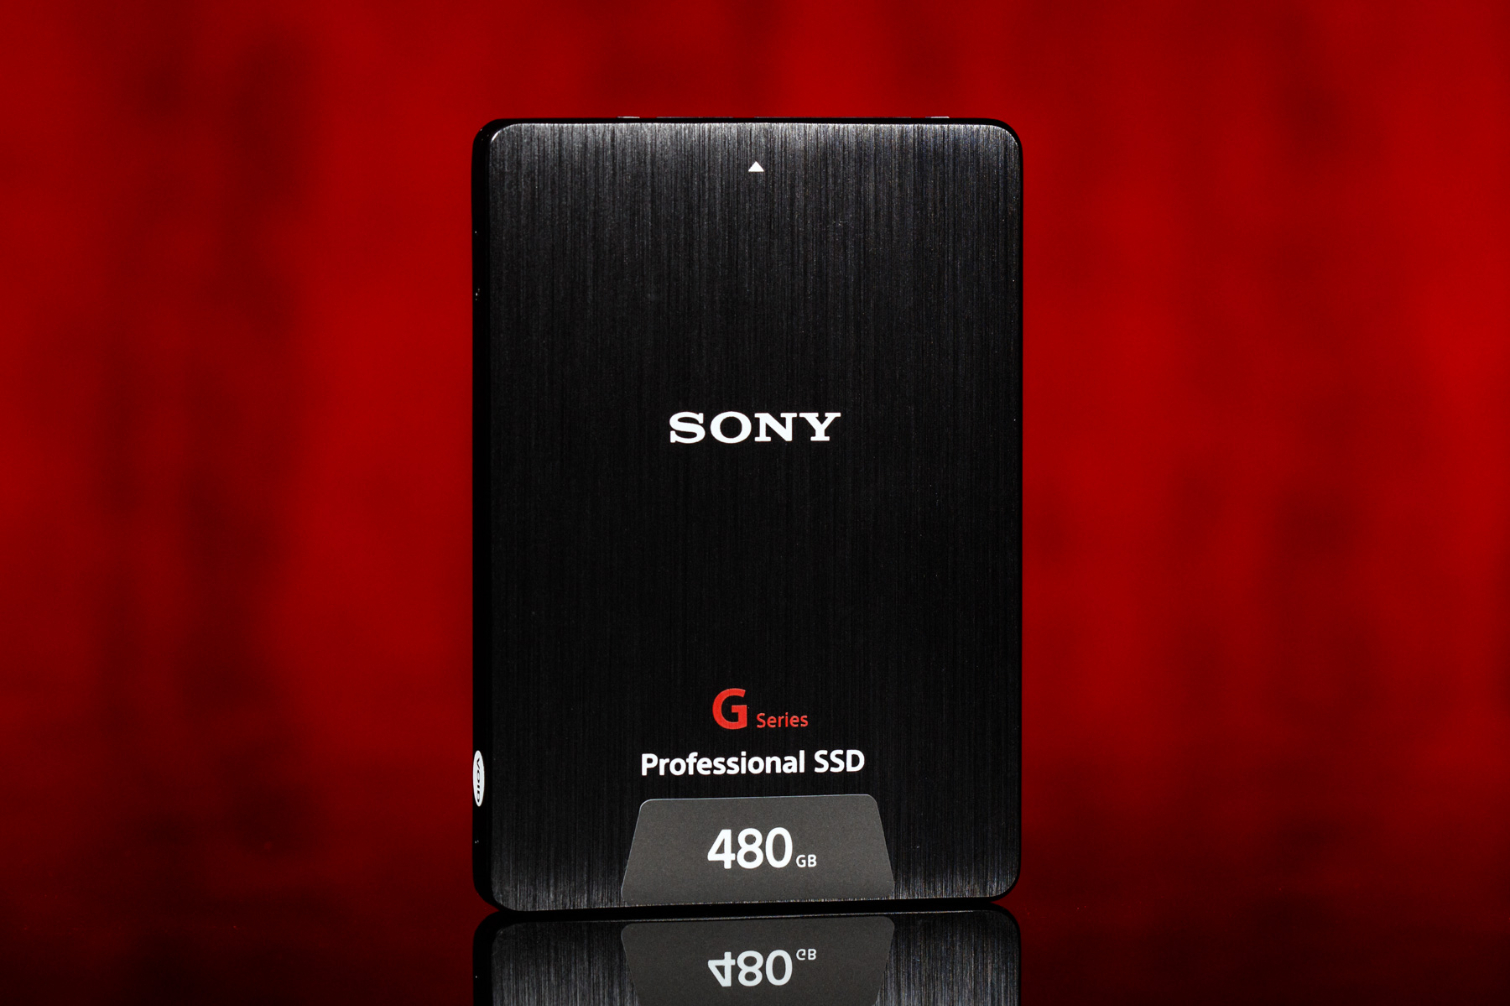 Sony G Series Professional SSD Review: Endurance Comes At A Price